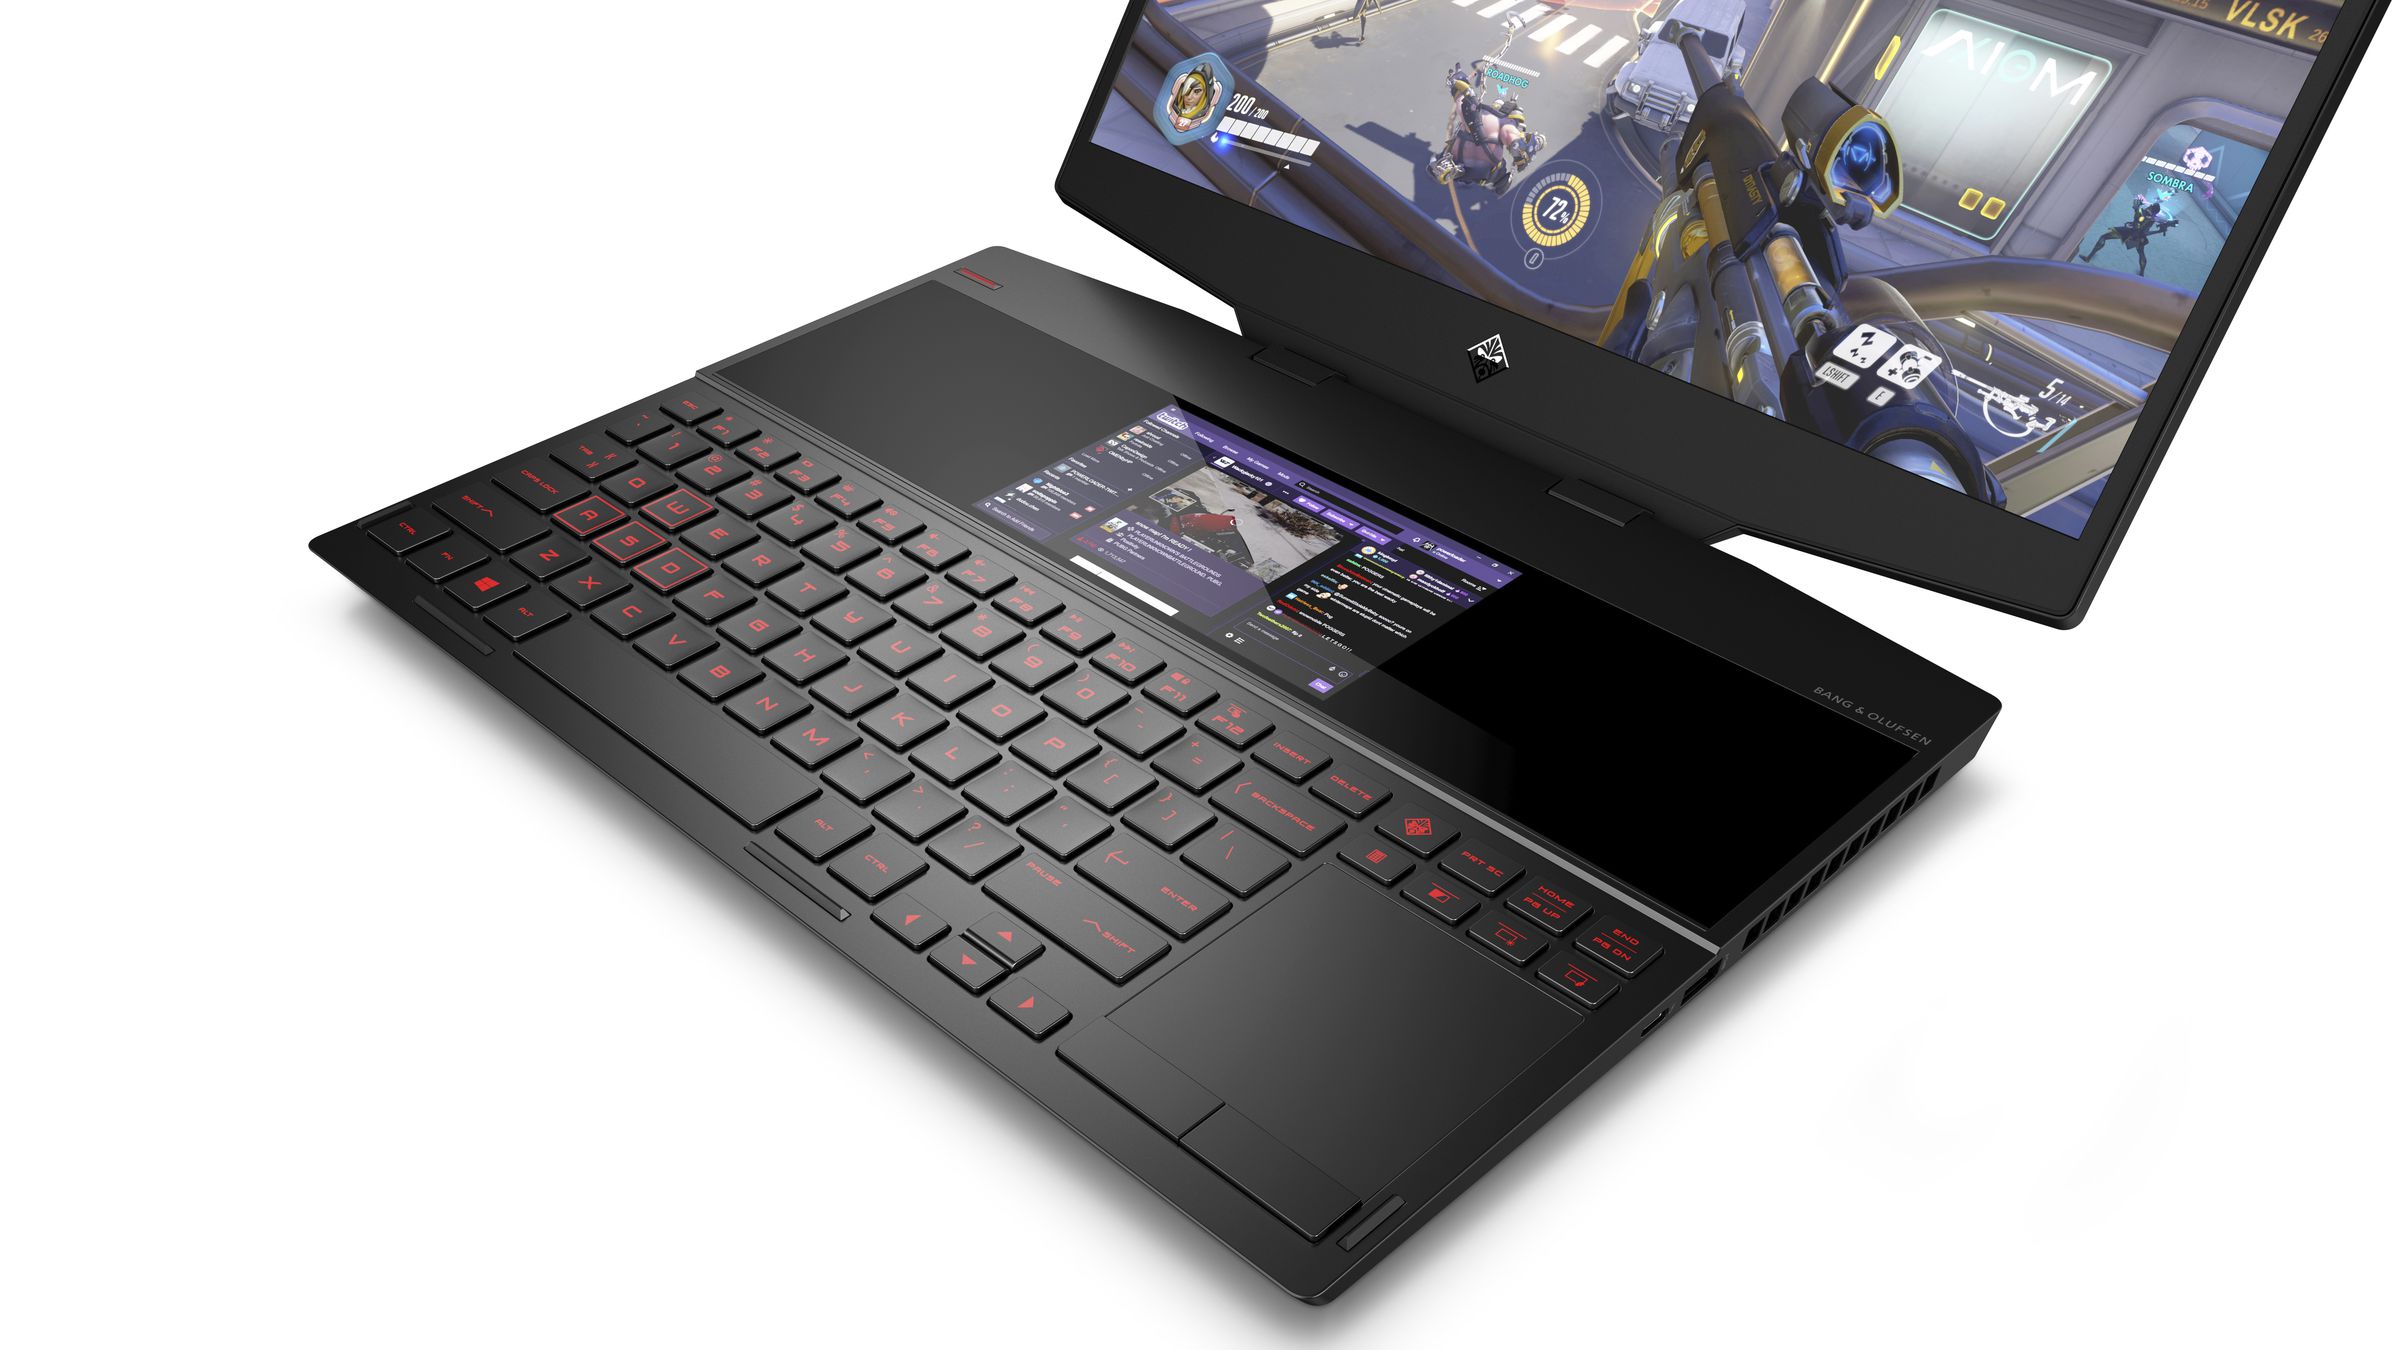 The Omen X 2S has a second 6-inch display above its keyboard.